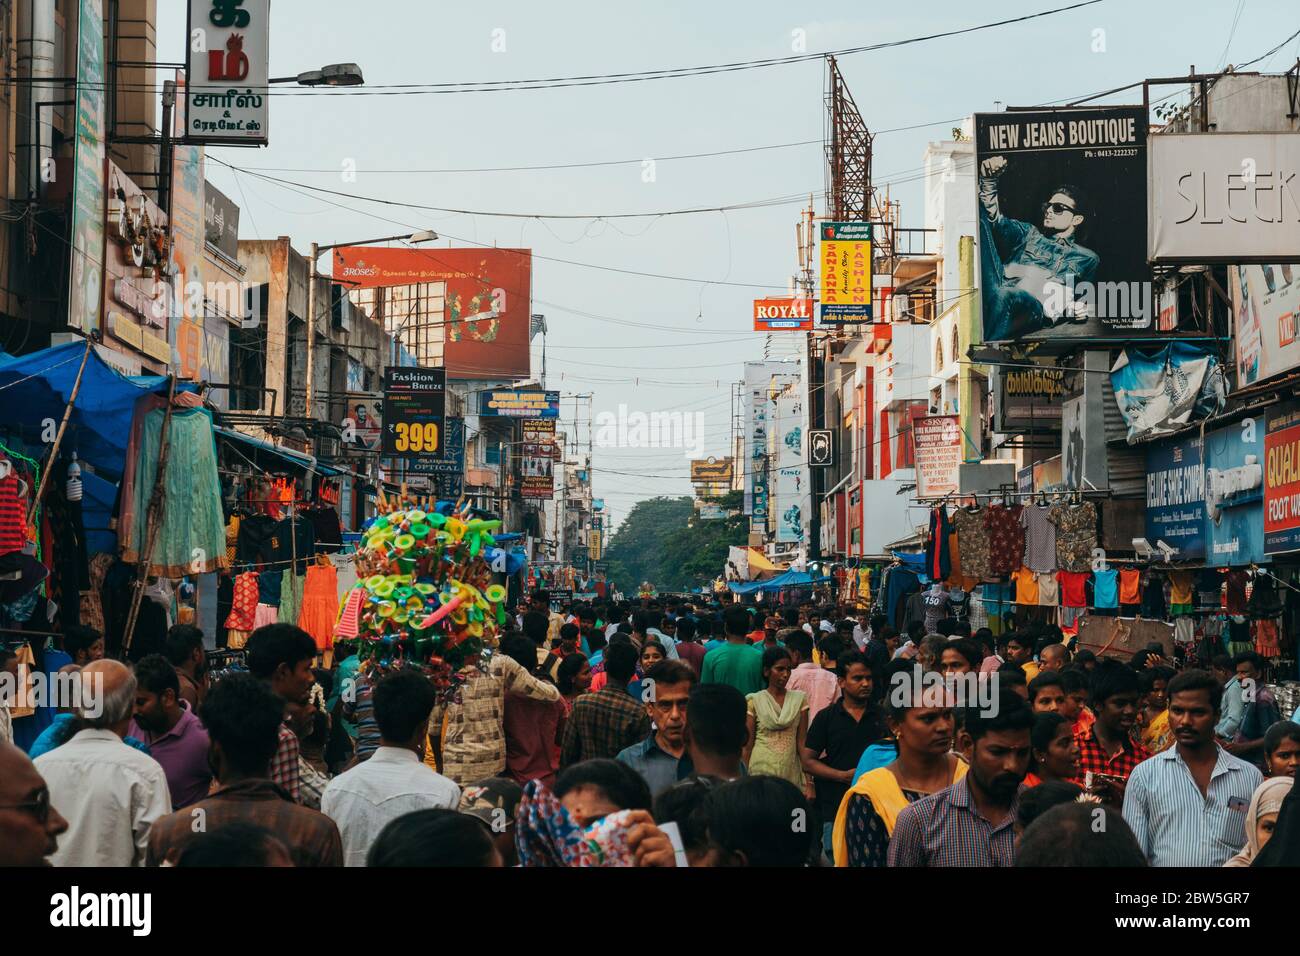 A packed inner city street on a Sunday evening in Pondicherry, India Stock Photo